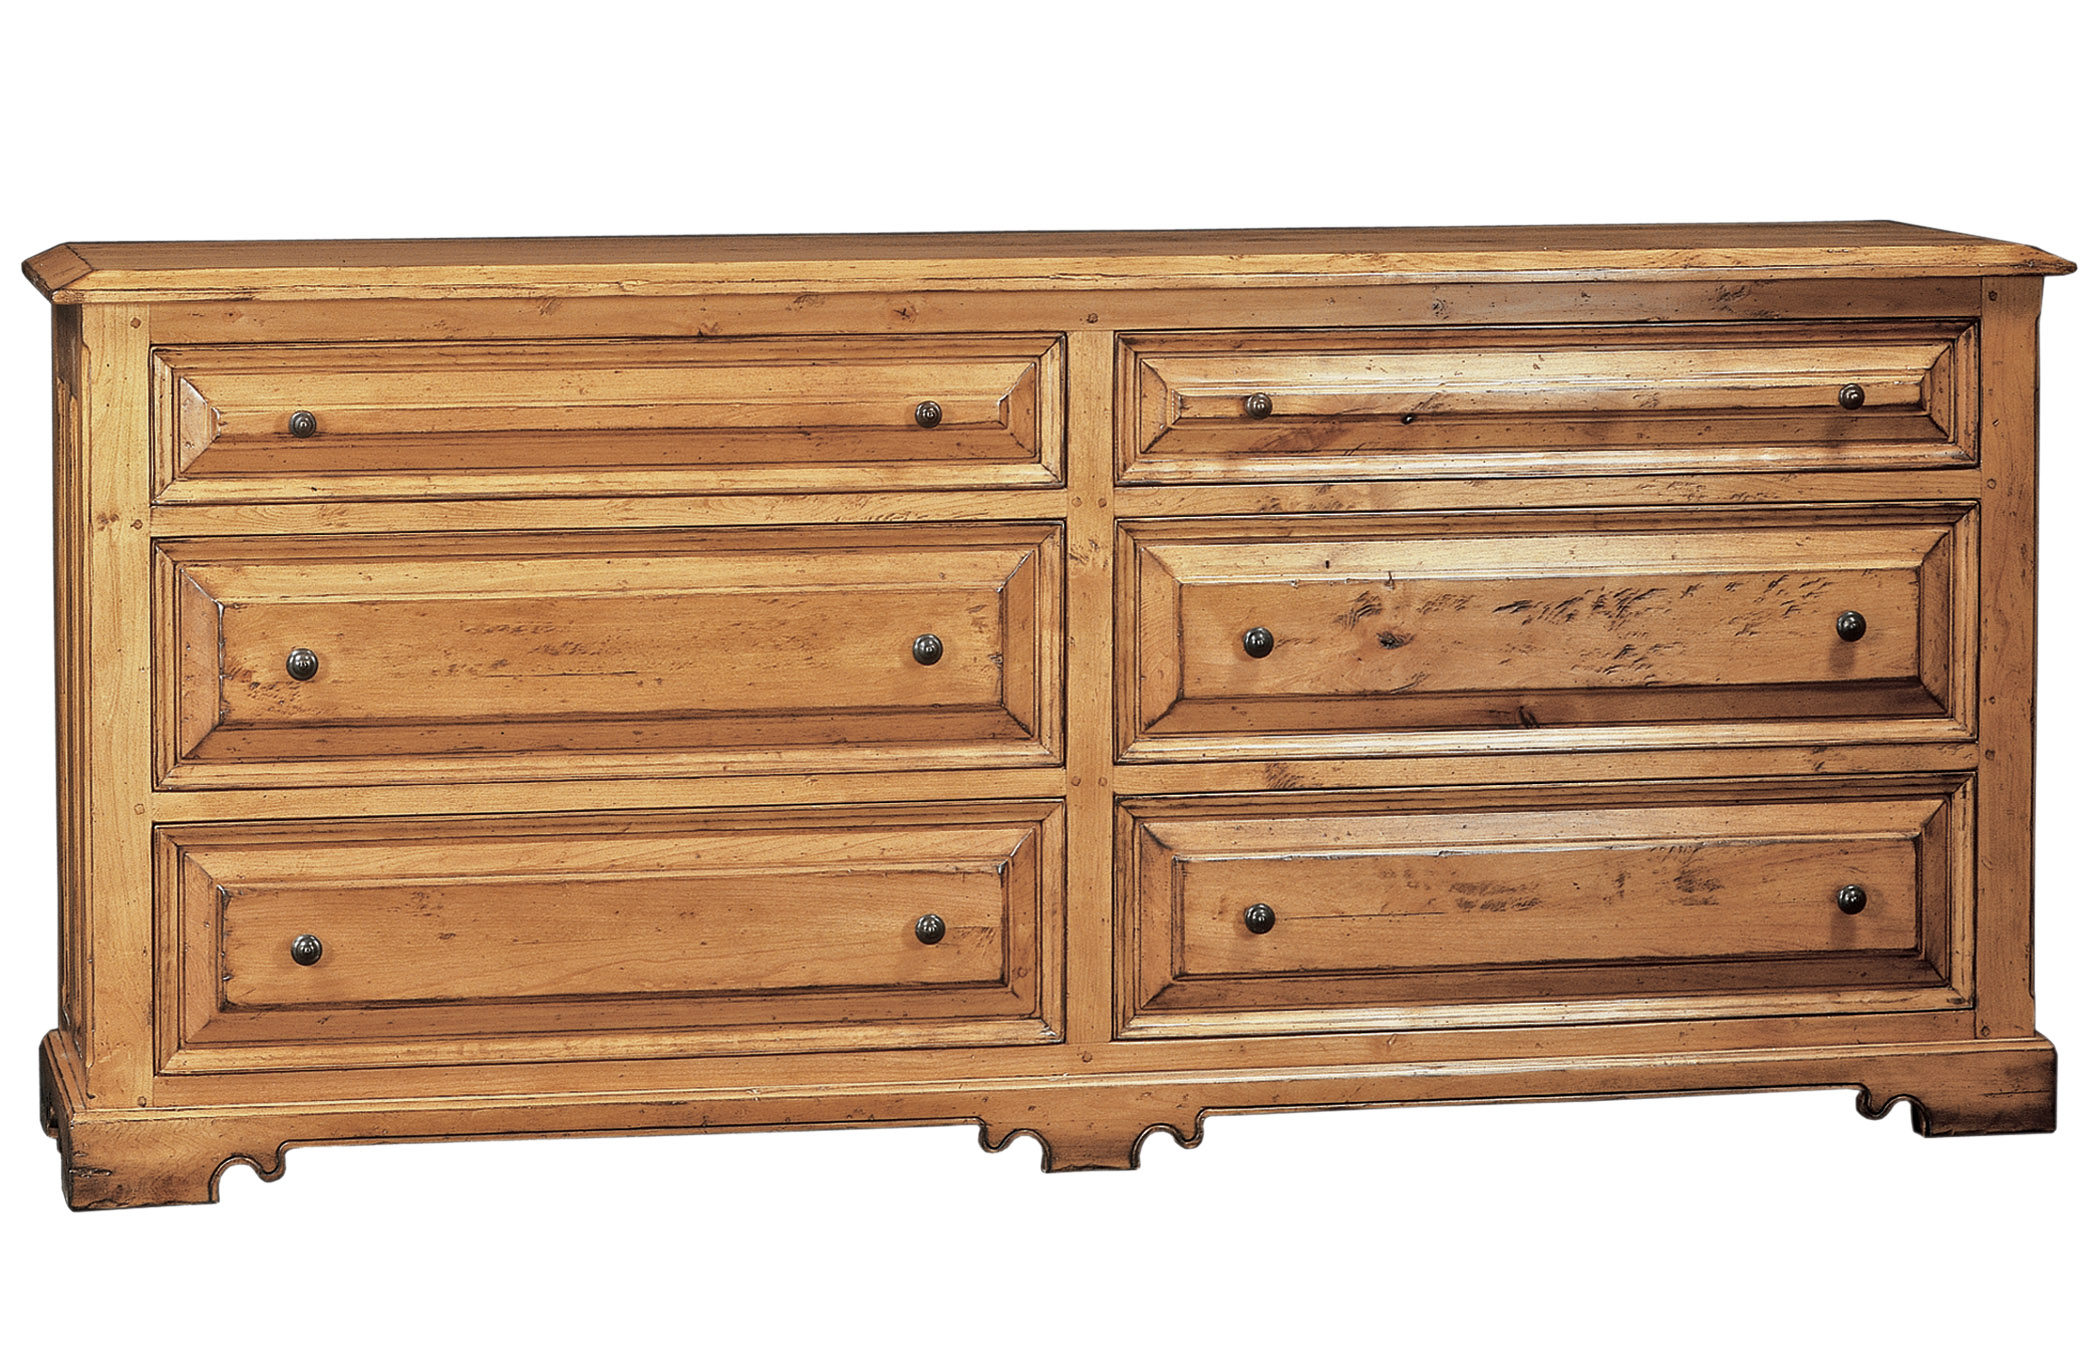 Suffolk traditional stained chest of drawers dresser by Woodland furniture in Idaho Falls